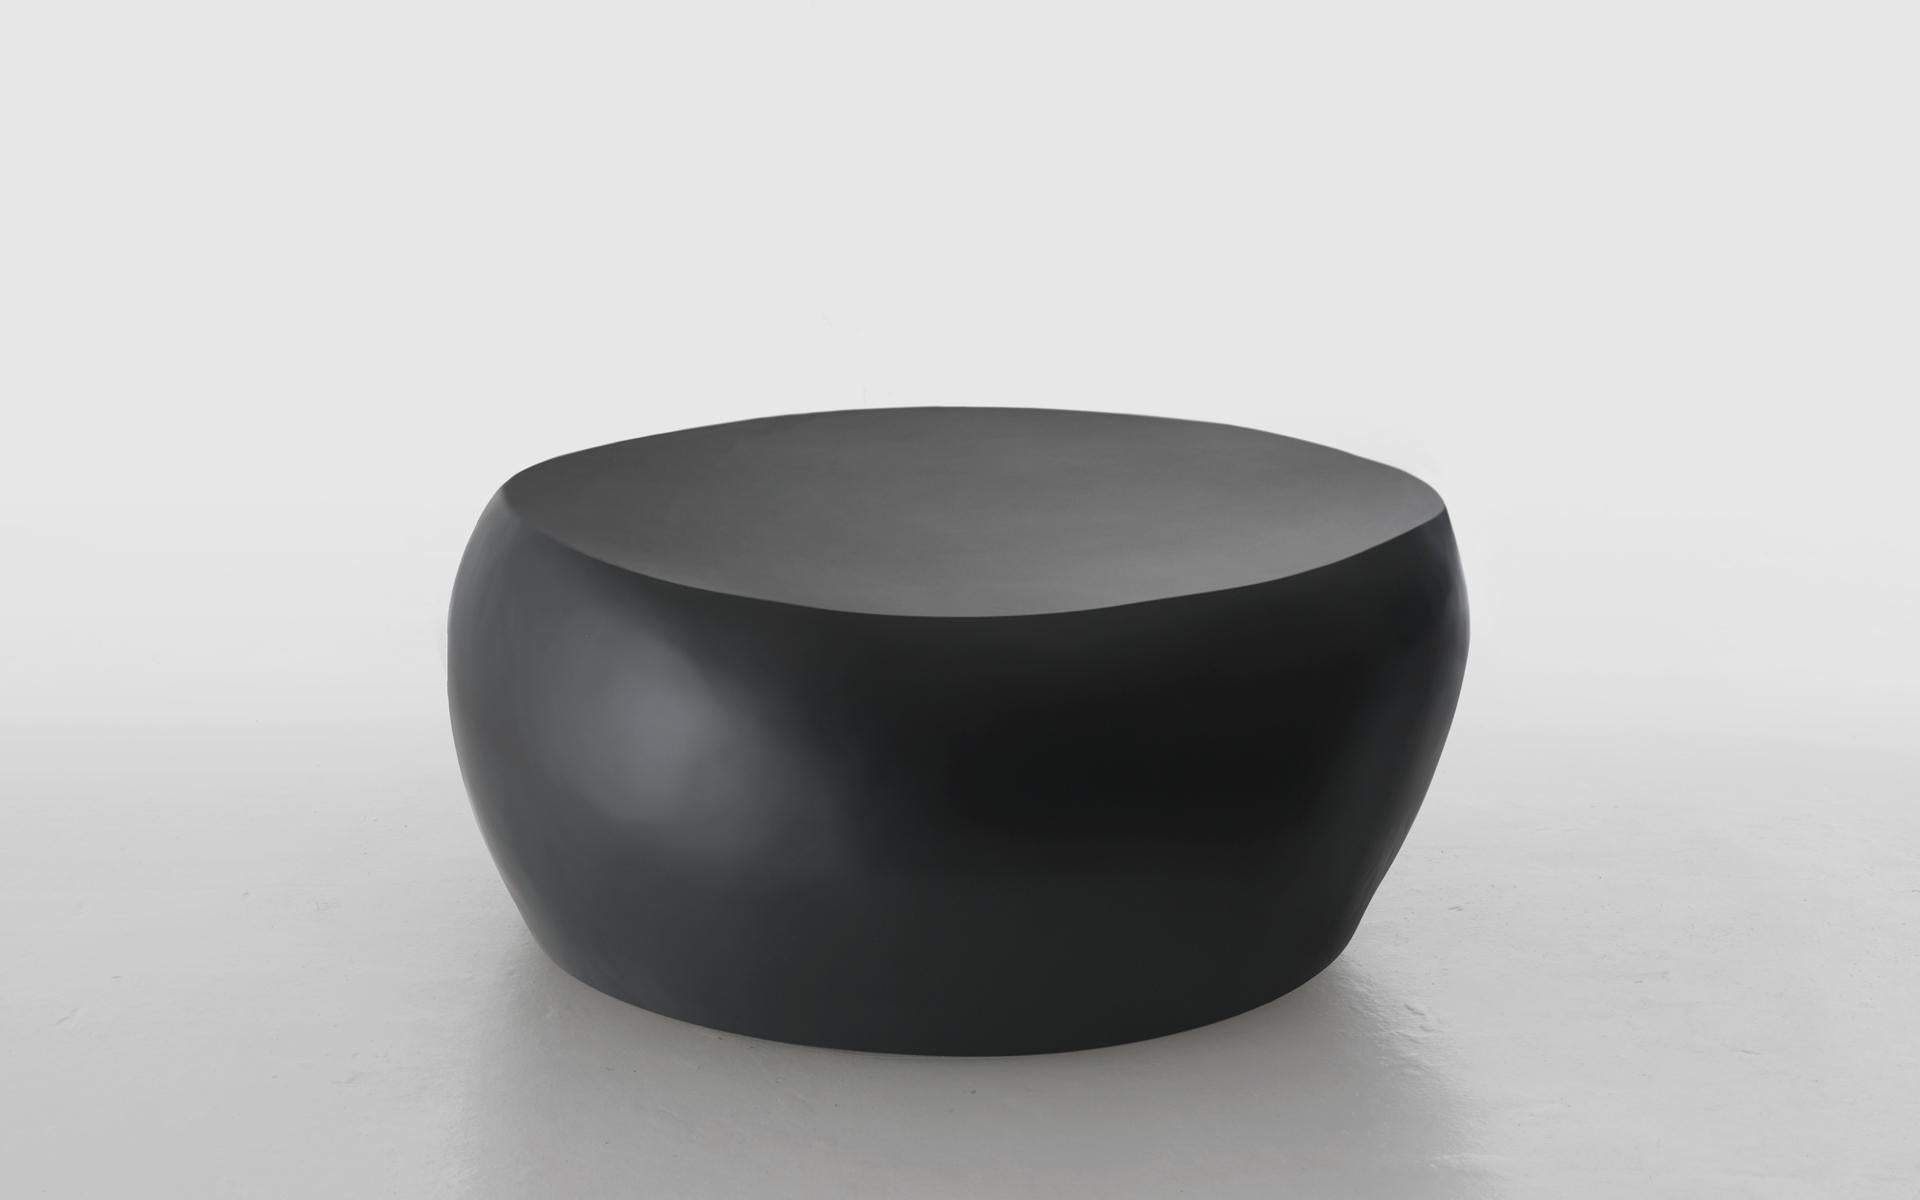 Slab coffee table by Imperfettolab
2011
Dimensions: 92 x 80 x H 34.
Materials: Fibreglass.
Available in black and white.

Seat/Coffee table in fibreglass.

Imperfetto Lab
Who we are ? We are a family.
Verter Turroni, Emanuela Ravelli and